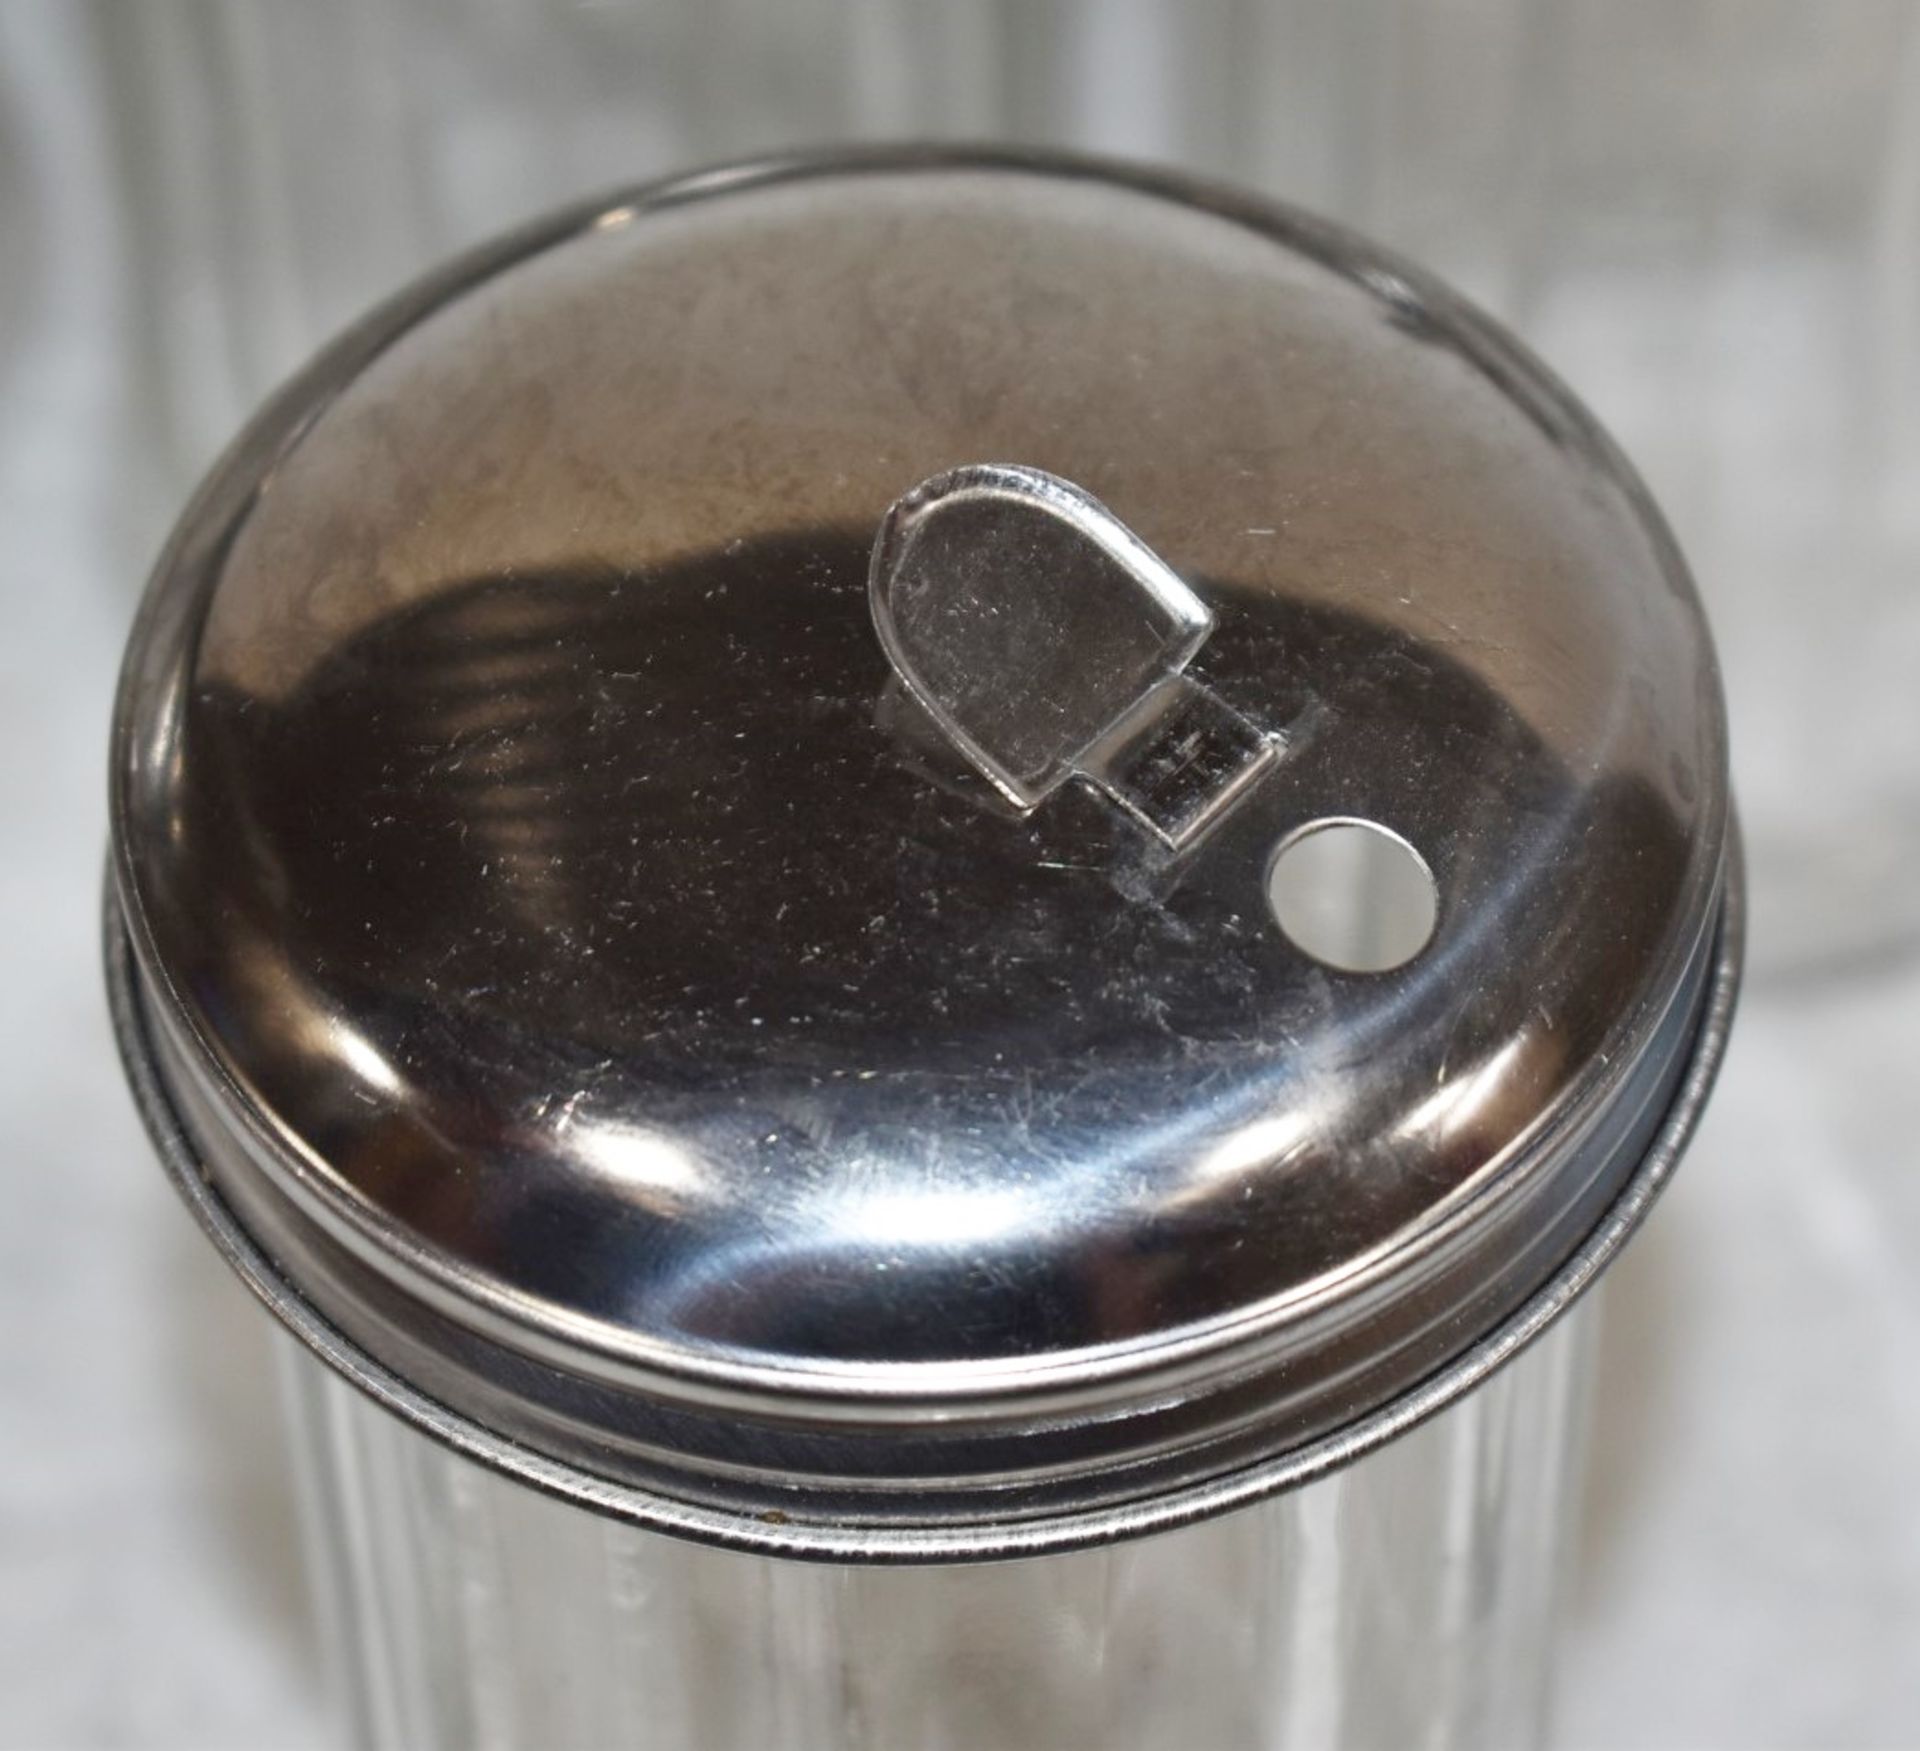 14 x Glass Sugar Dispensing Pots With Stainless Steel Lids - Suitable For Cafes or Restaurants - Image 3 of 8